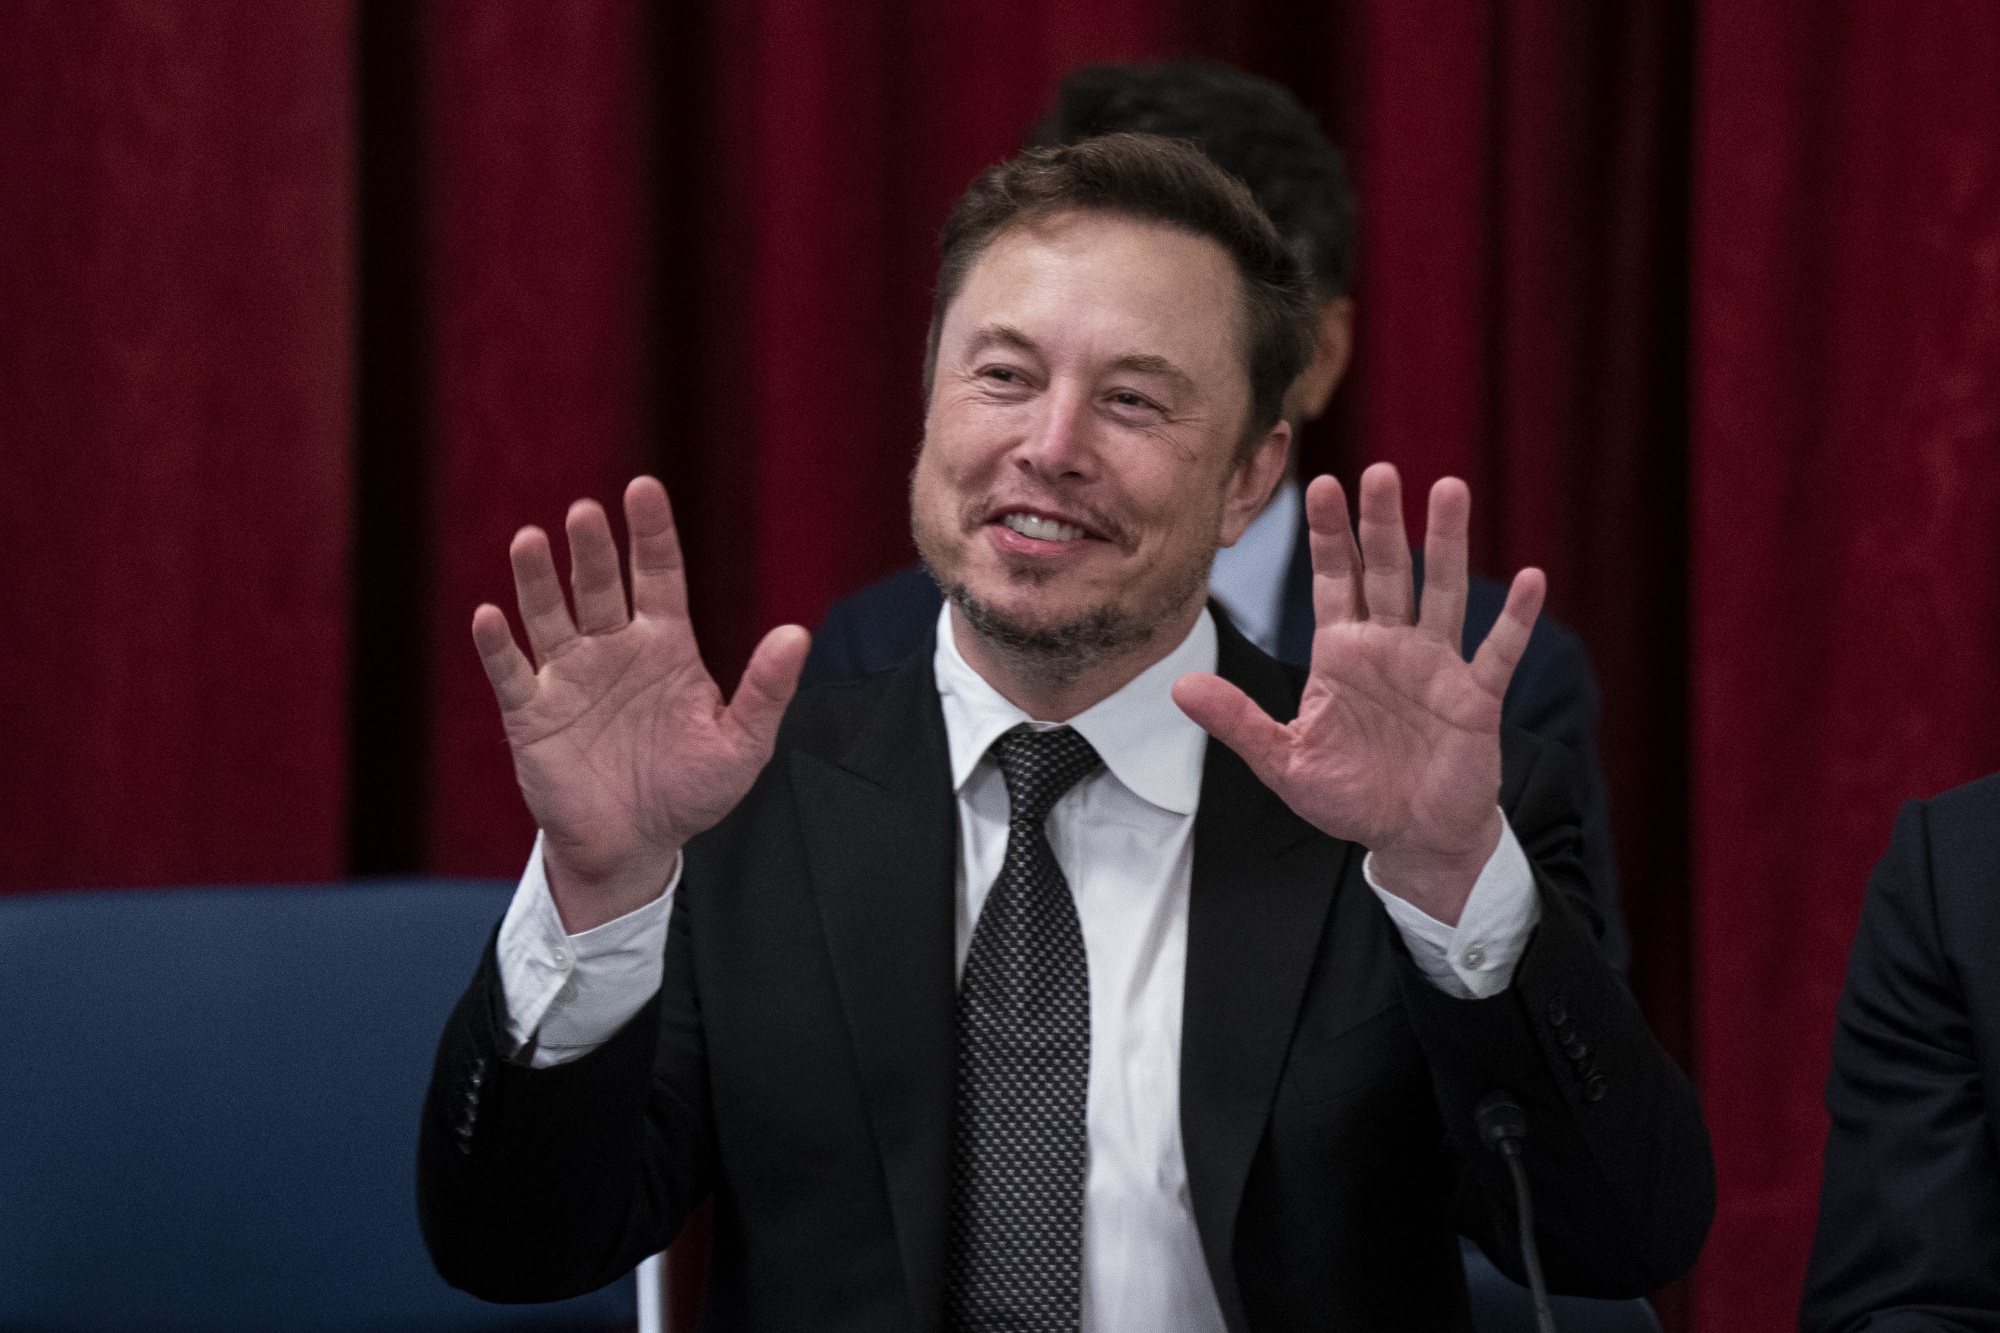 Elon Musk Explains How AI and Electric Cars Could Zap the Power Supplies by 2025